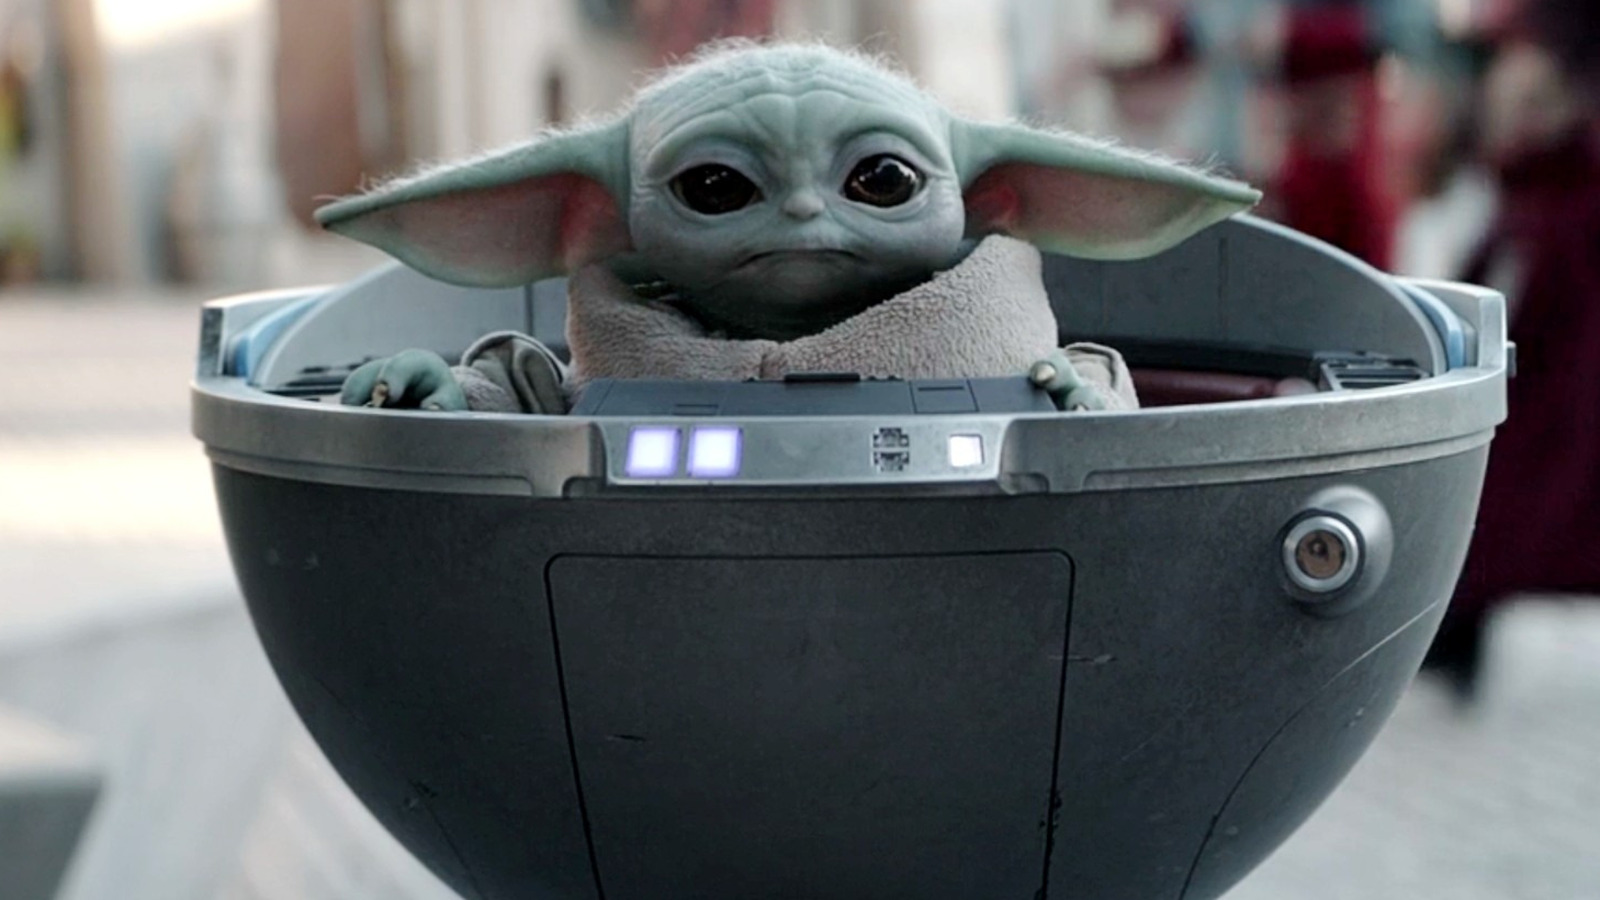 What Is Baby Yoda's Name